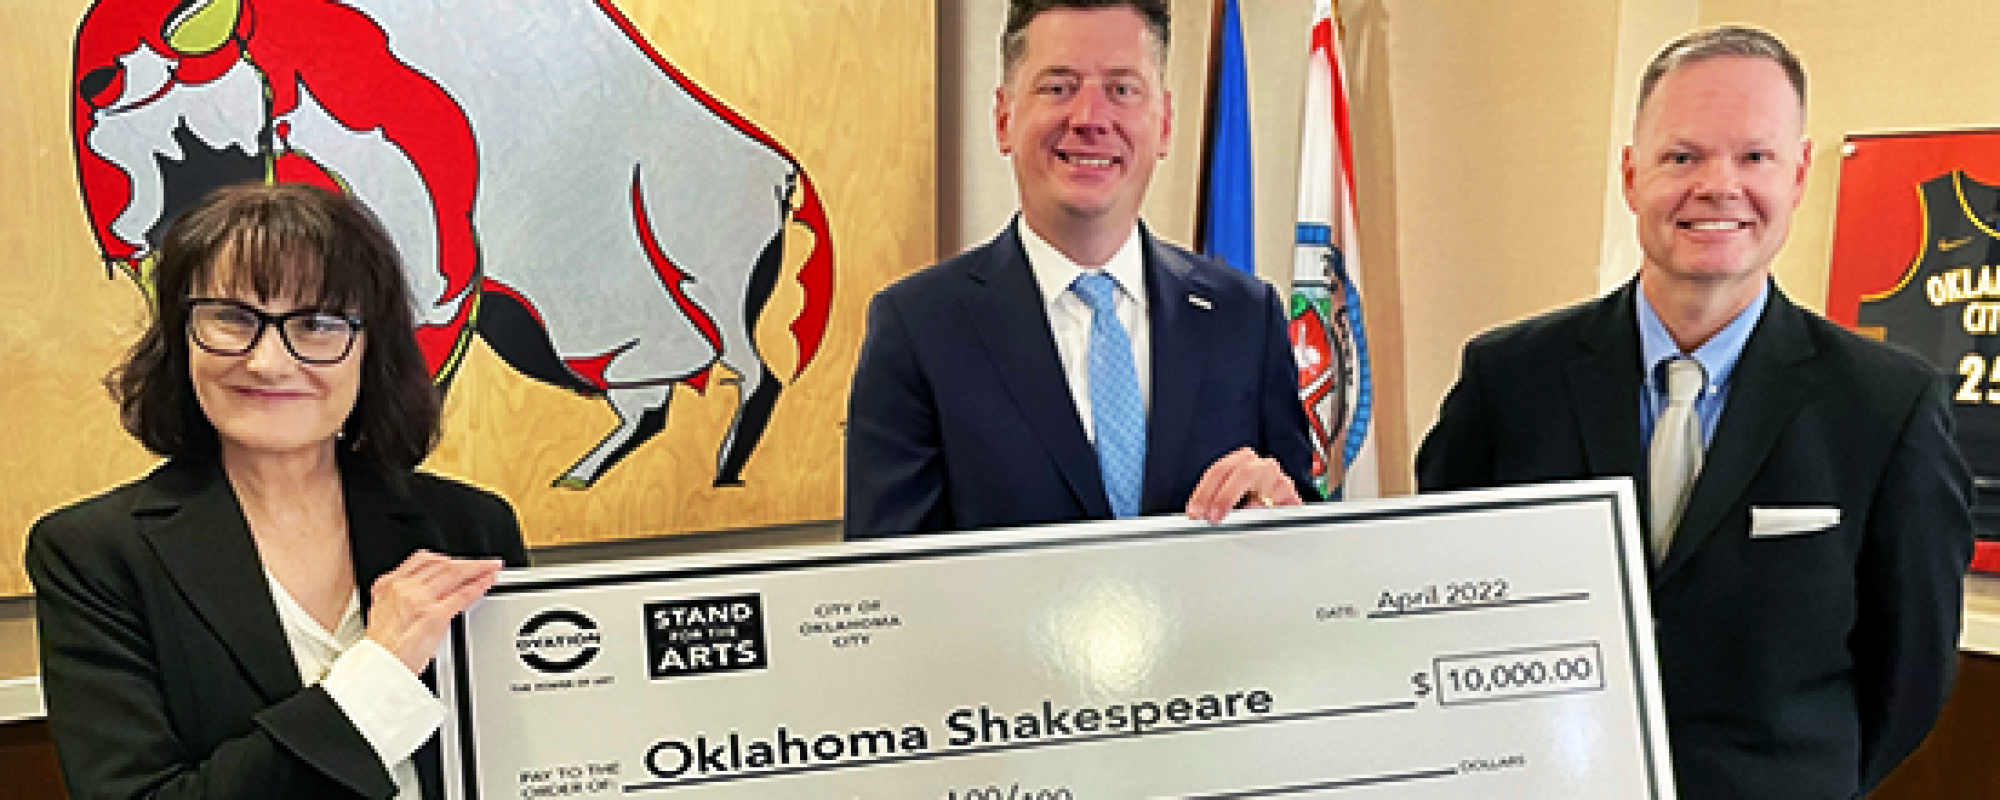 OKLAHOMA CITY RECOGNIZED BY OVATION TV FOR ITS STAND FOR THE ARTS INITIATIVE